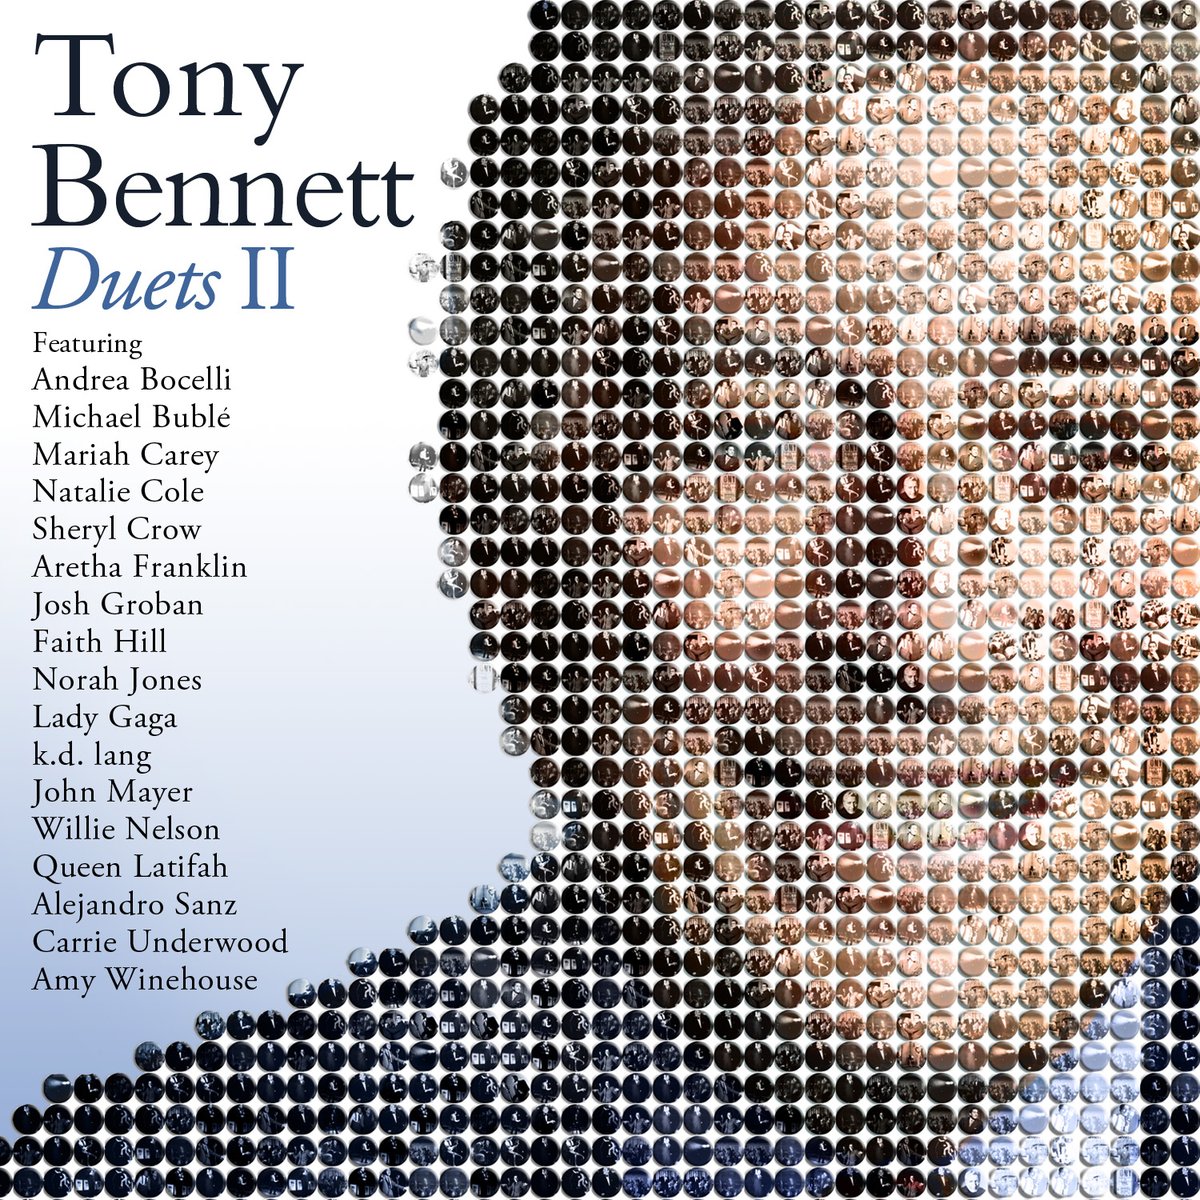 Duets II was released on this day 9 years ago. This project gave me the opportunity to introduce a new generation to The Great American Songbook alongside wonderful artists such as @ladygaga, @amywinehouse, @ArethaFranklin, and many more. TonyBennett.lnk.to/Duets2TP